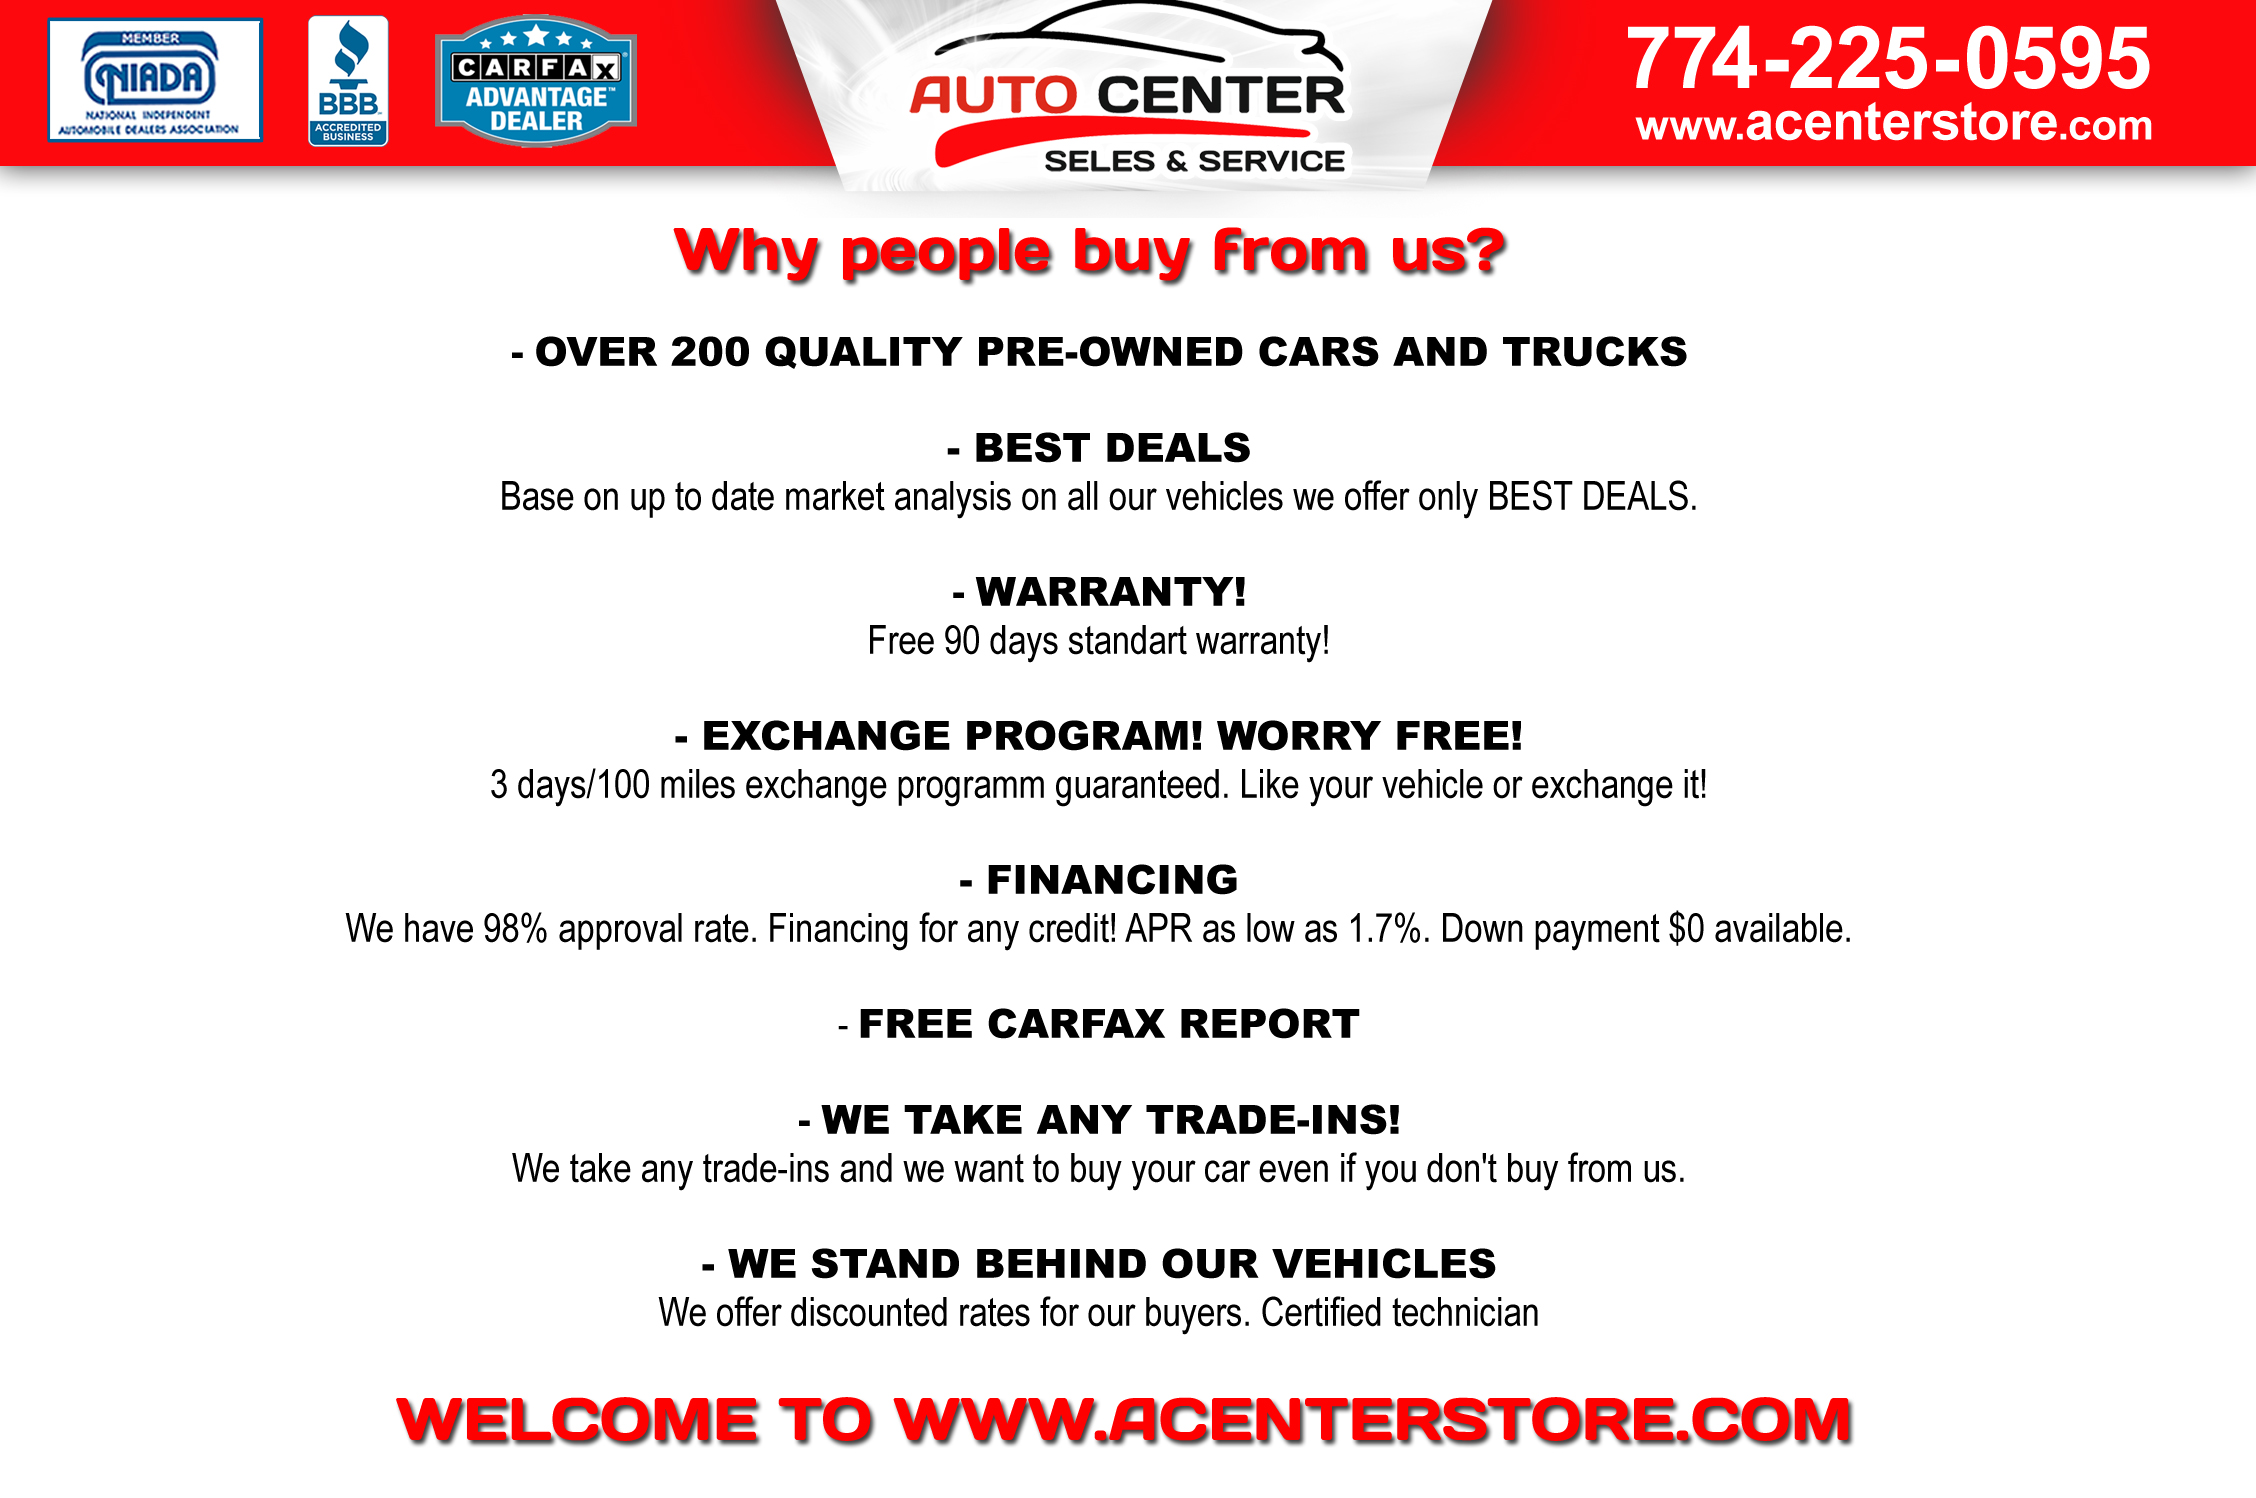 Used Car Dealership in West Bridgewater, MA - Auto Center Sales & Service